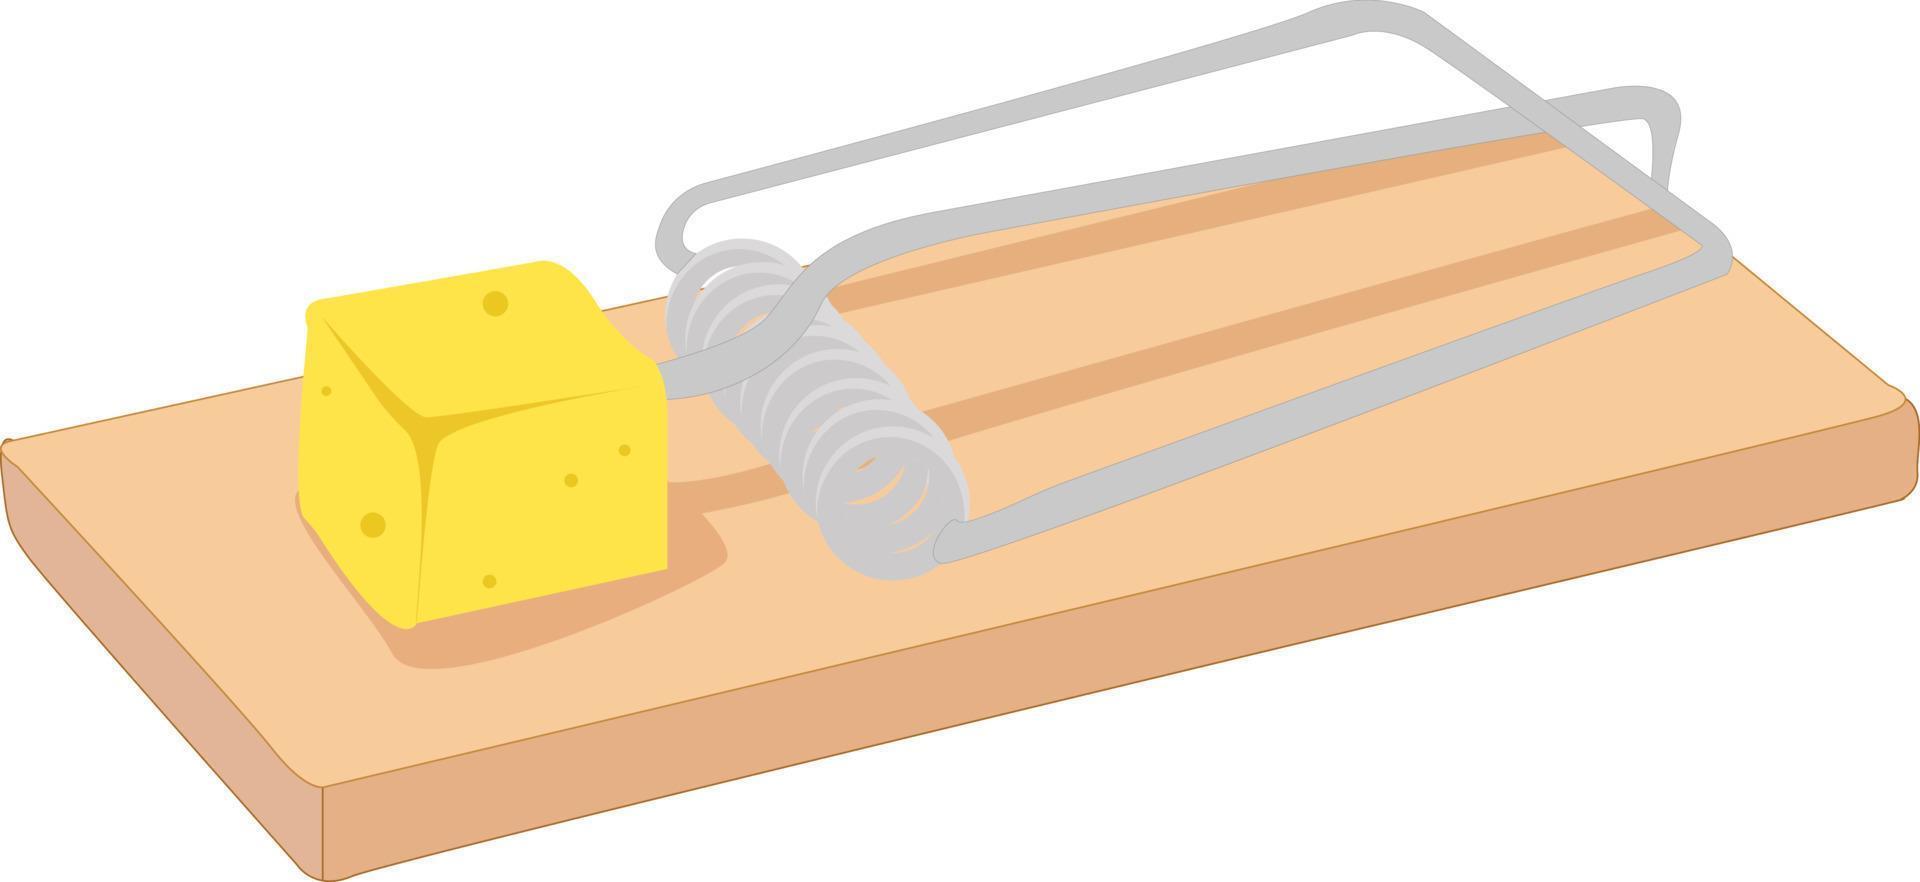 Cheese in the mouse trap, illustration, vector on white background